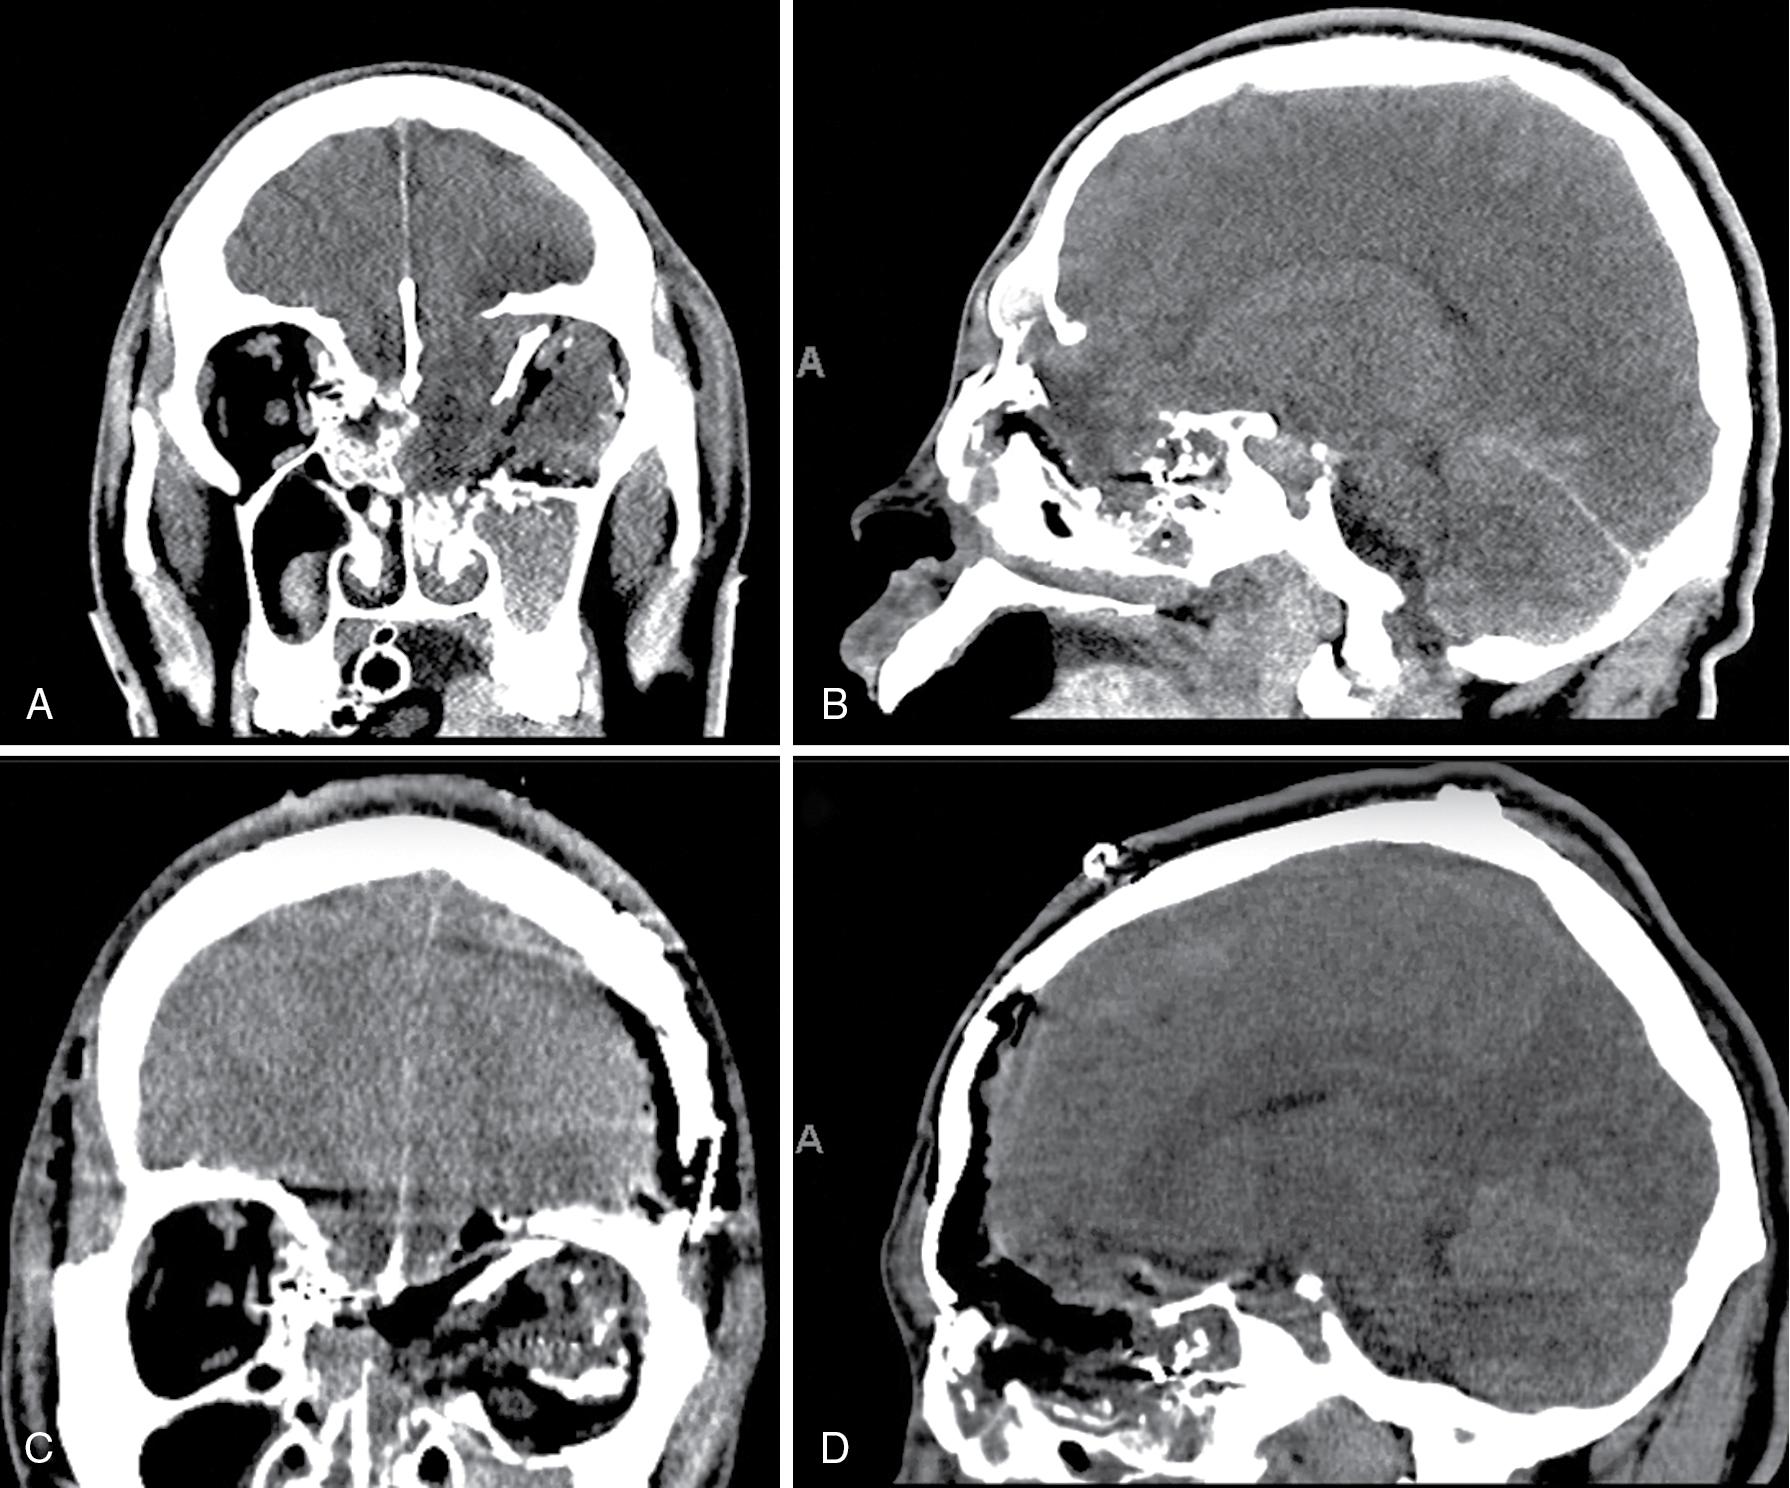 Fig. 14.1, A 19-year-old man presented with a Glasgow Coma Scale score of 11 (E4V2M5) after a gunshot wound to the head that traversed from the right nasion across the left ethmoids to the left orbital apex and left temporal lobe. He was initially managed with intracranial pressure bolt monitor, but on day 9, he developed cerebrospinal fluid (CSF) rhinorrhea. Computed tomography scan showed a large left ethmoid defect with encephalocele ( A and B ). A lumbar drain was placed before a transbasal approach for repair with pericranial graft transposition ( C and D ), and the drain was opened continuously for 3 days then removed, with resolution of the CSF leak. On follow-up, the patient remained blind in the left eye but was otherwise neurologically well without rhinorrhea.